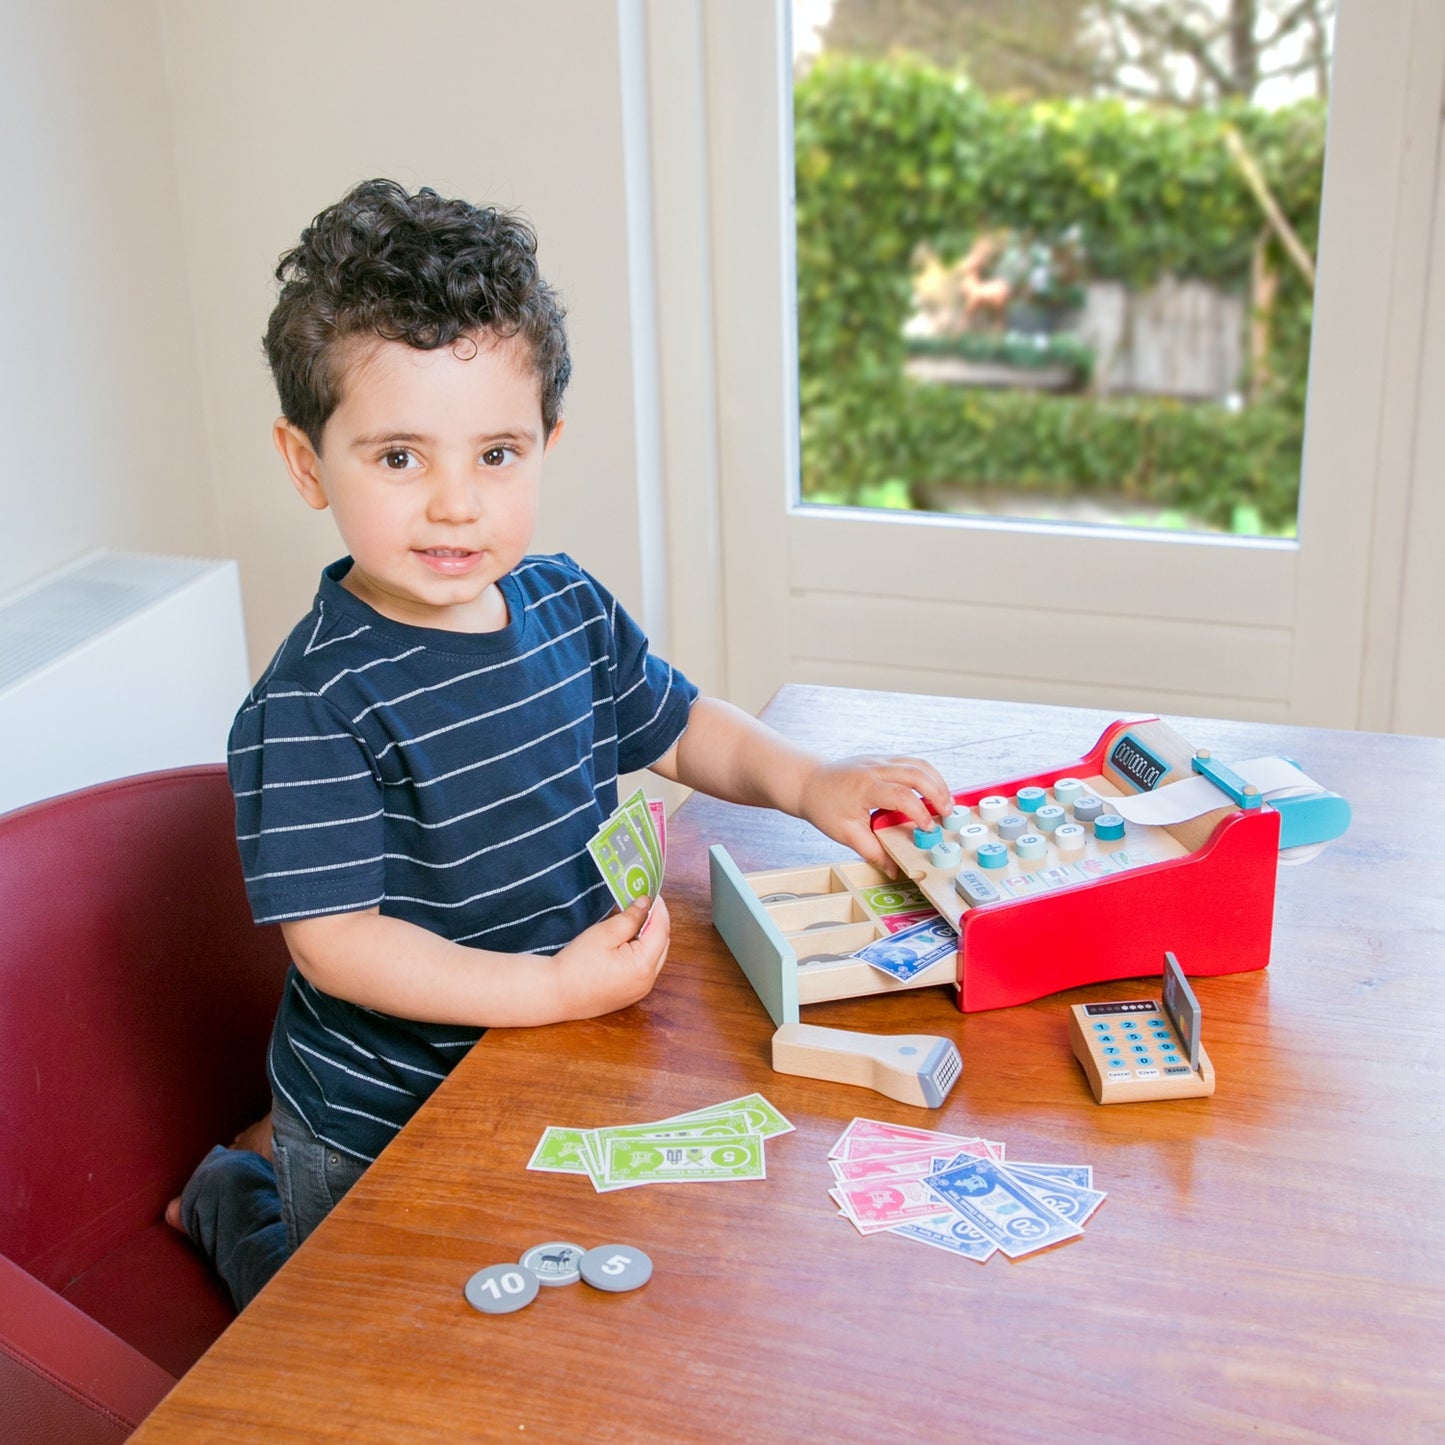 New Classic Toys Cash Register | Role Play Wooden Toy for Kids | Lifestyle: Boy Holding Money | BeoVERDE.ie